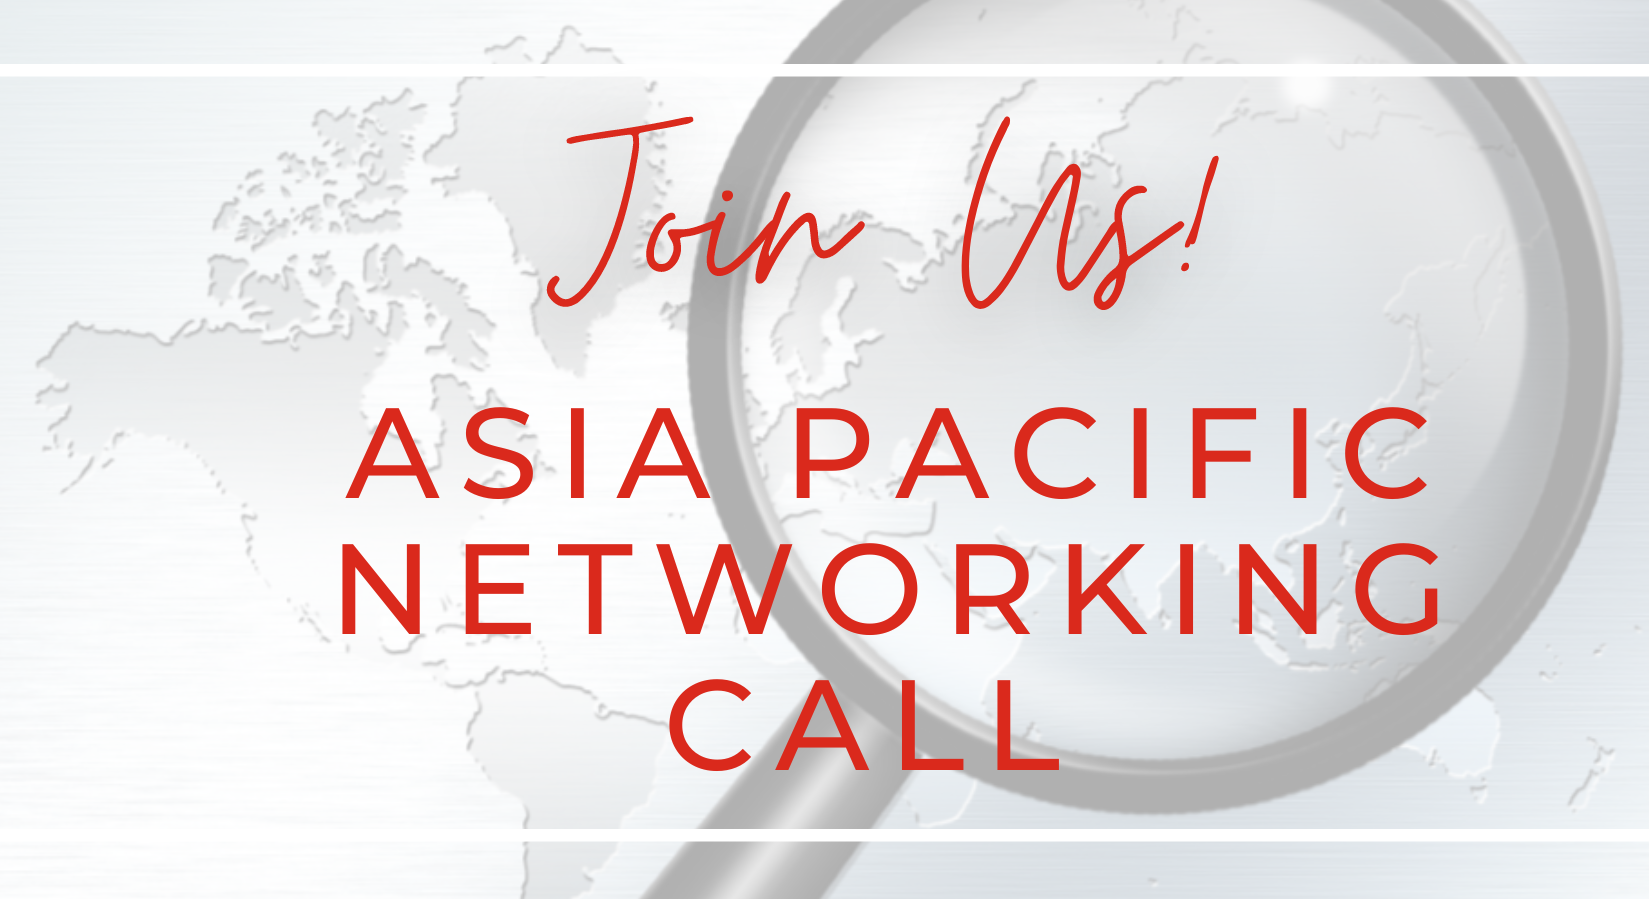 Asia Pacific Networking Calls